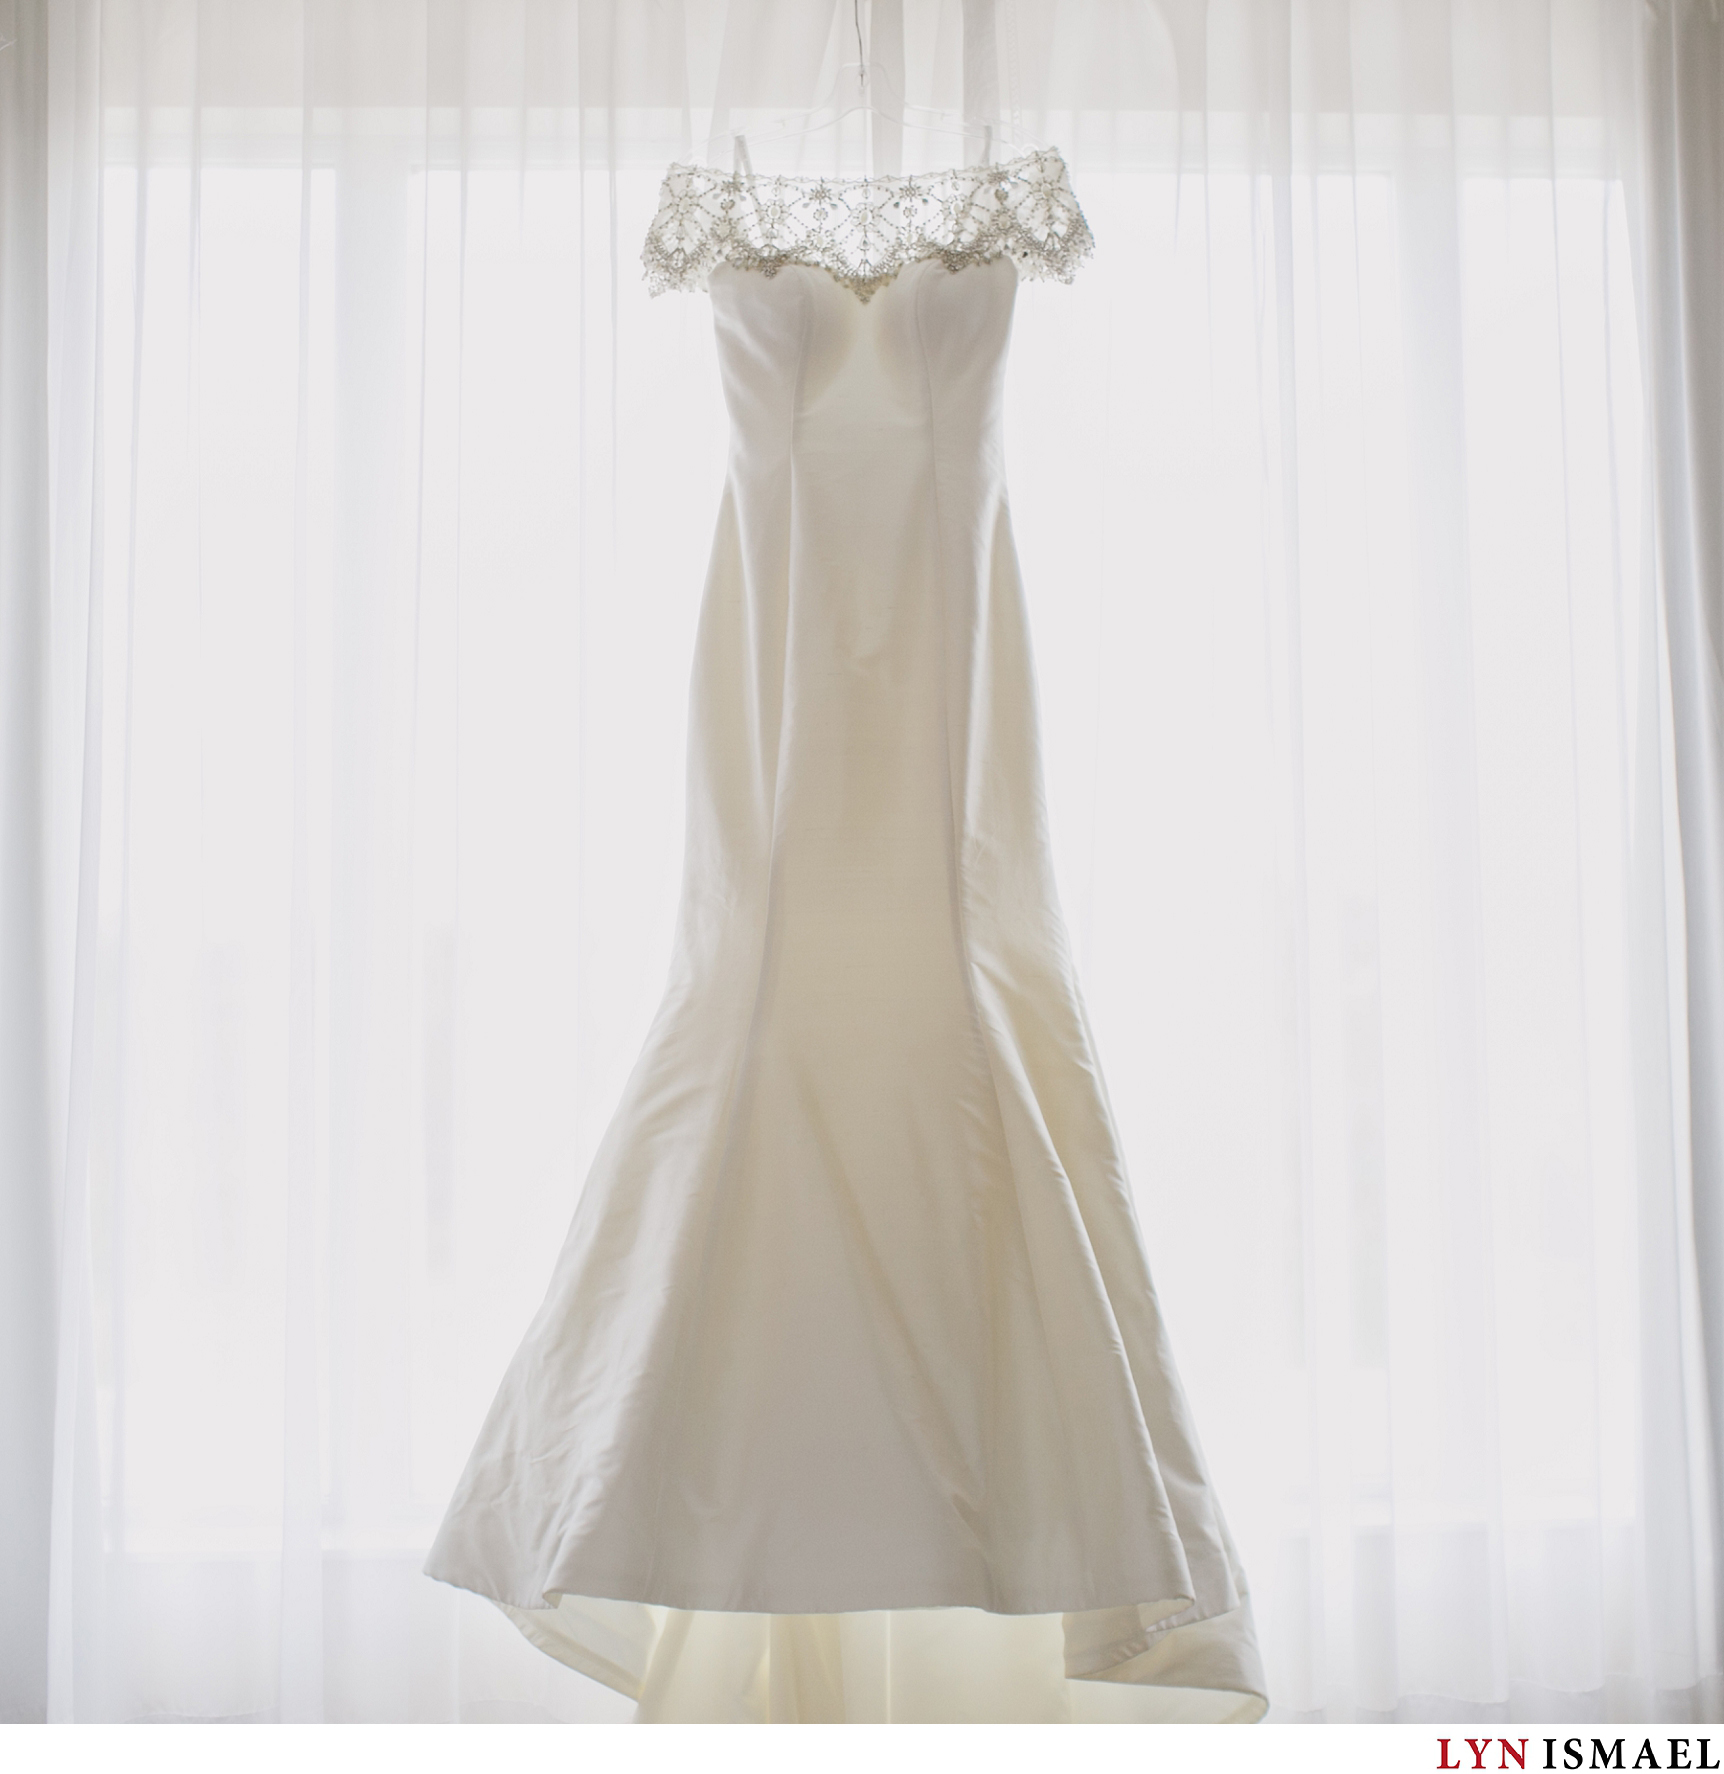 The bride's wedding gown hanging by the window.